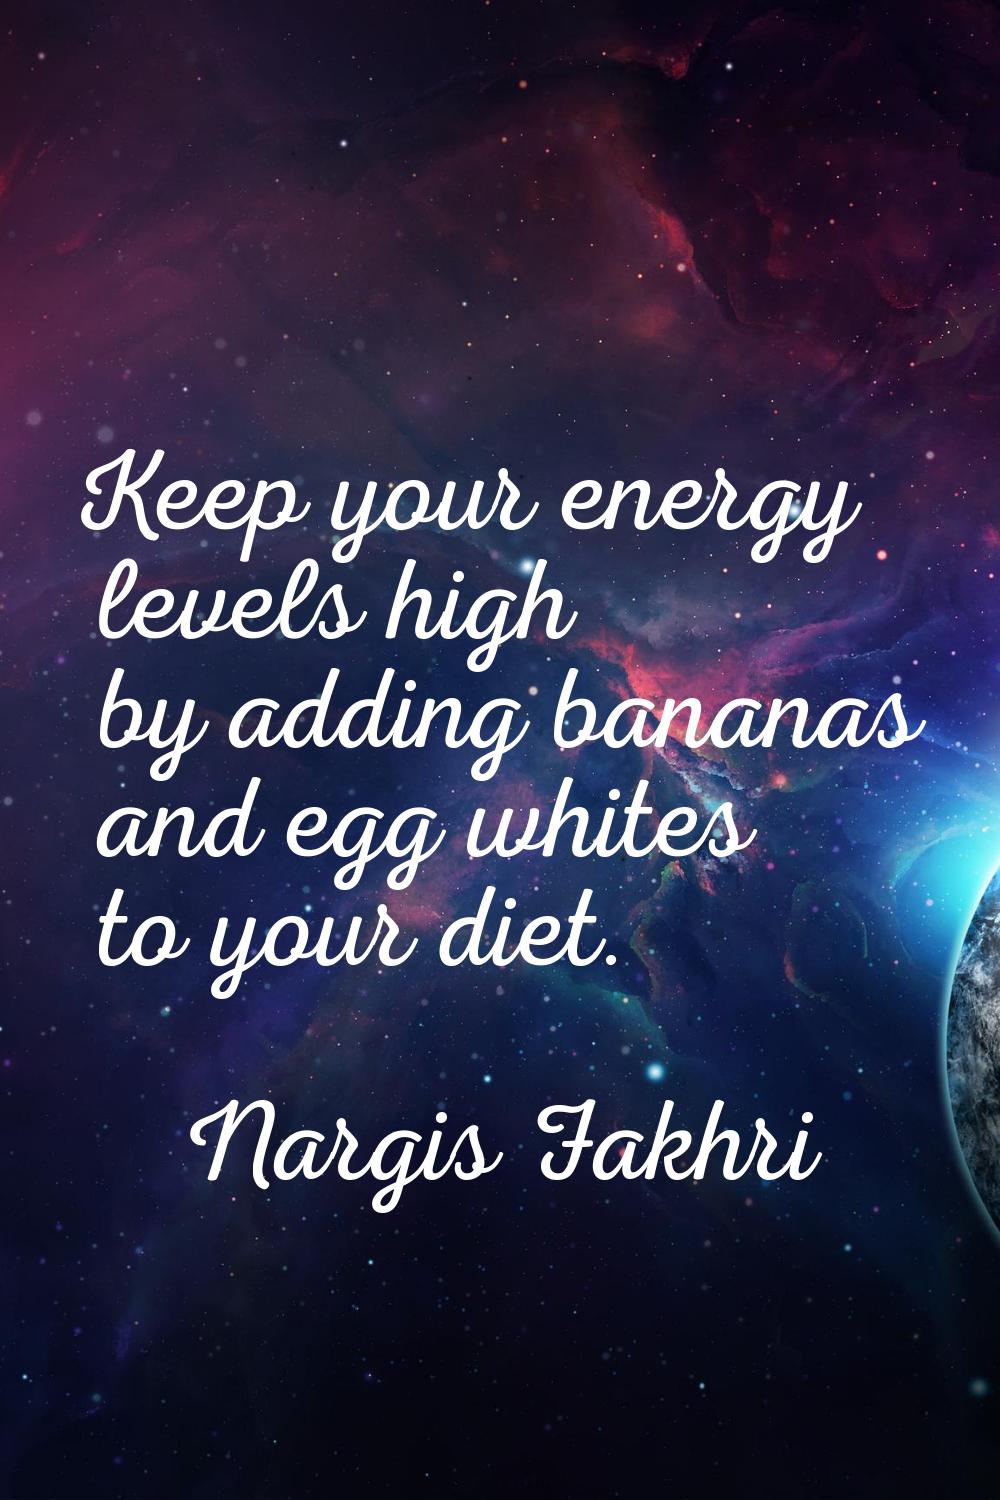 Keep your energy levels high by adding bananas and egg whites to your diet.